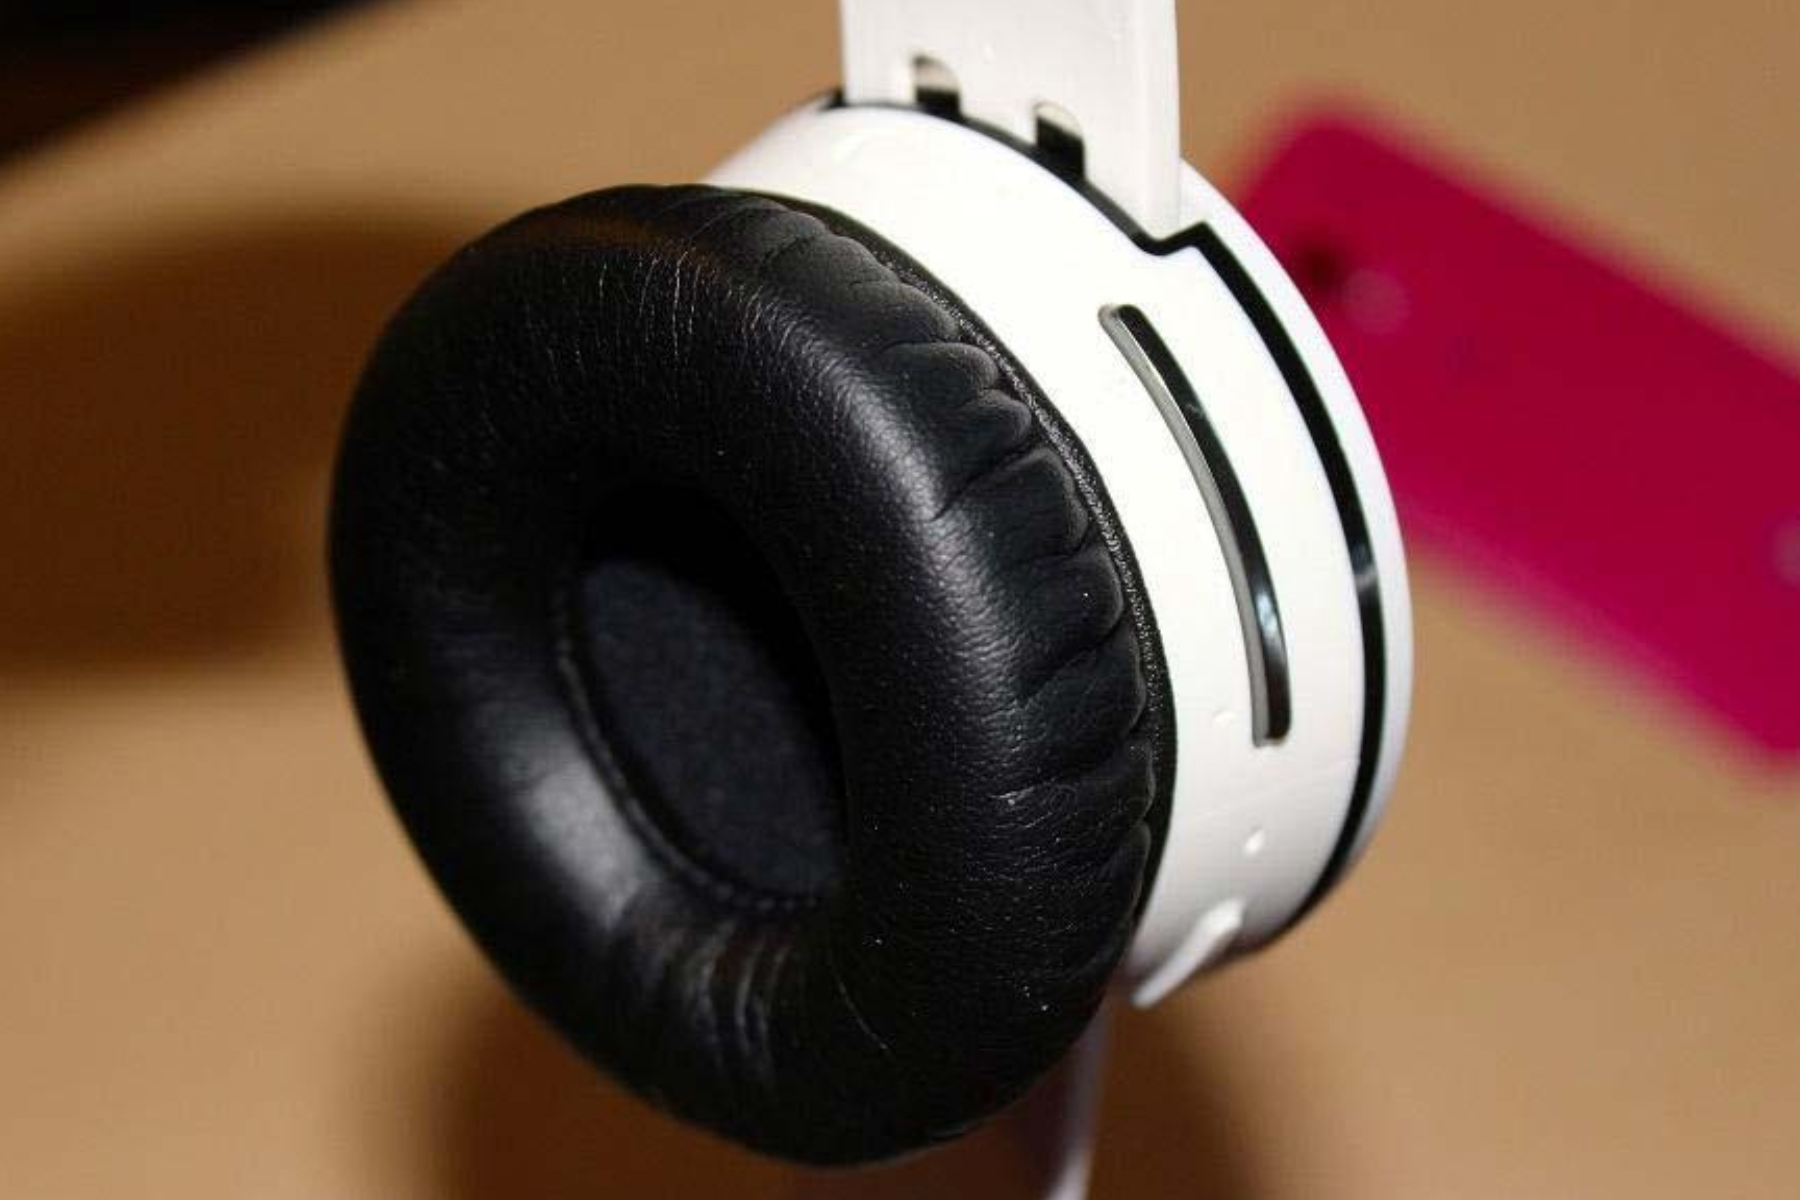 A headphone with adjusted earcups